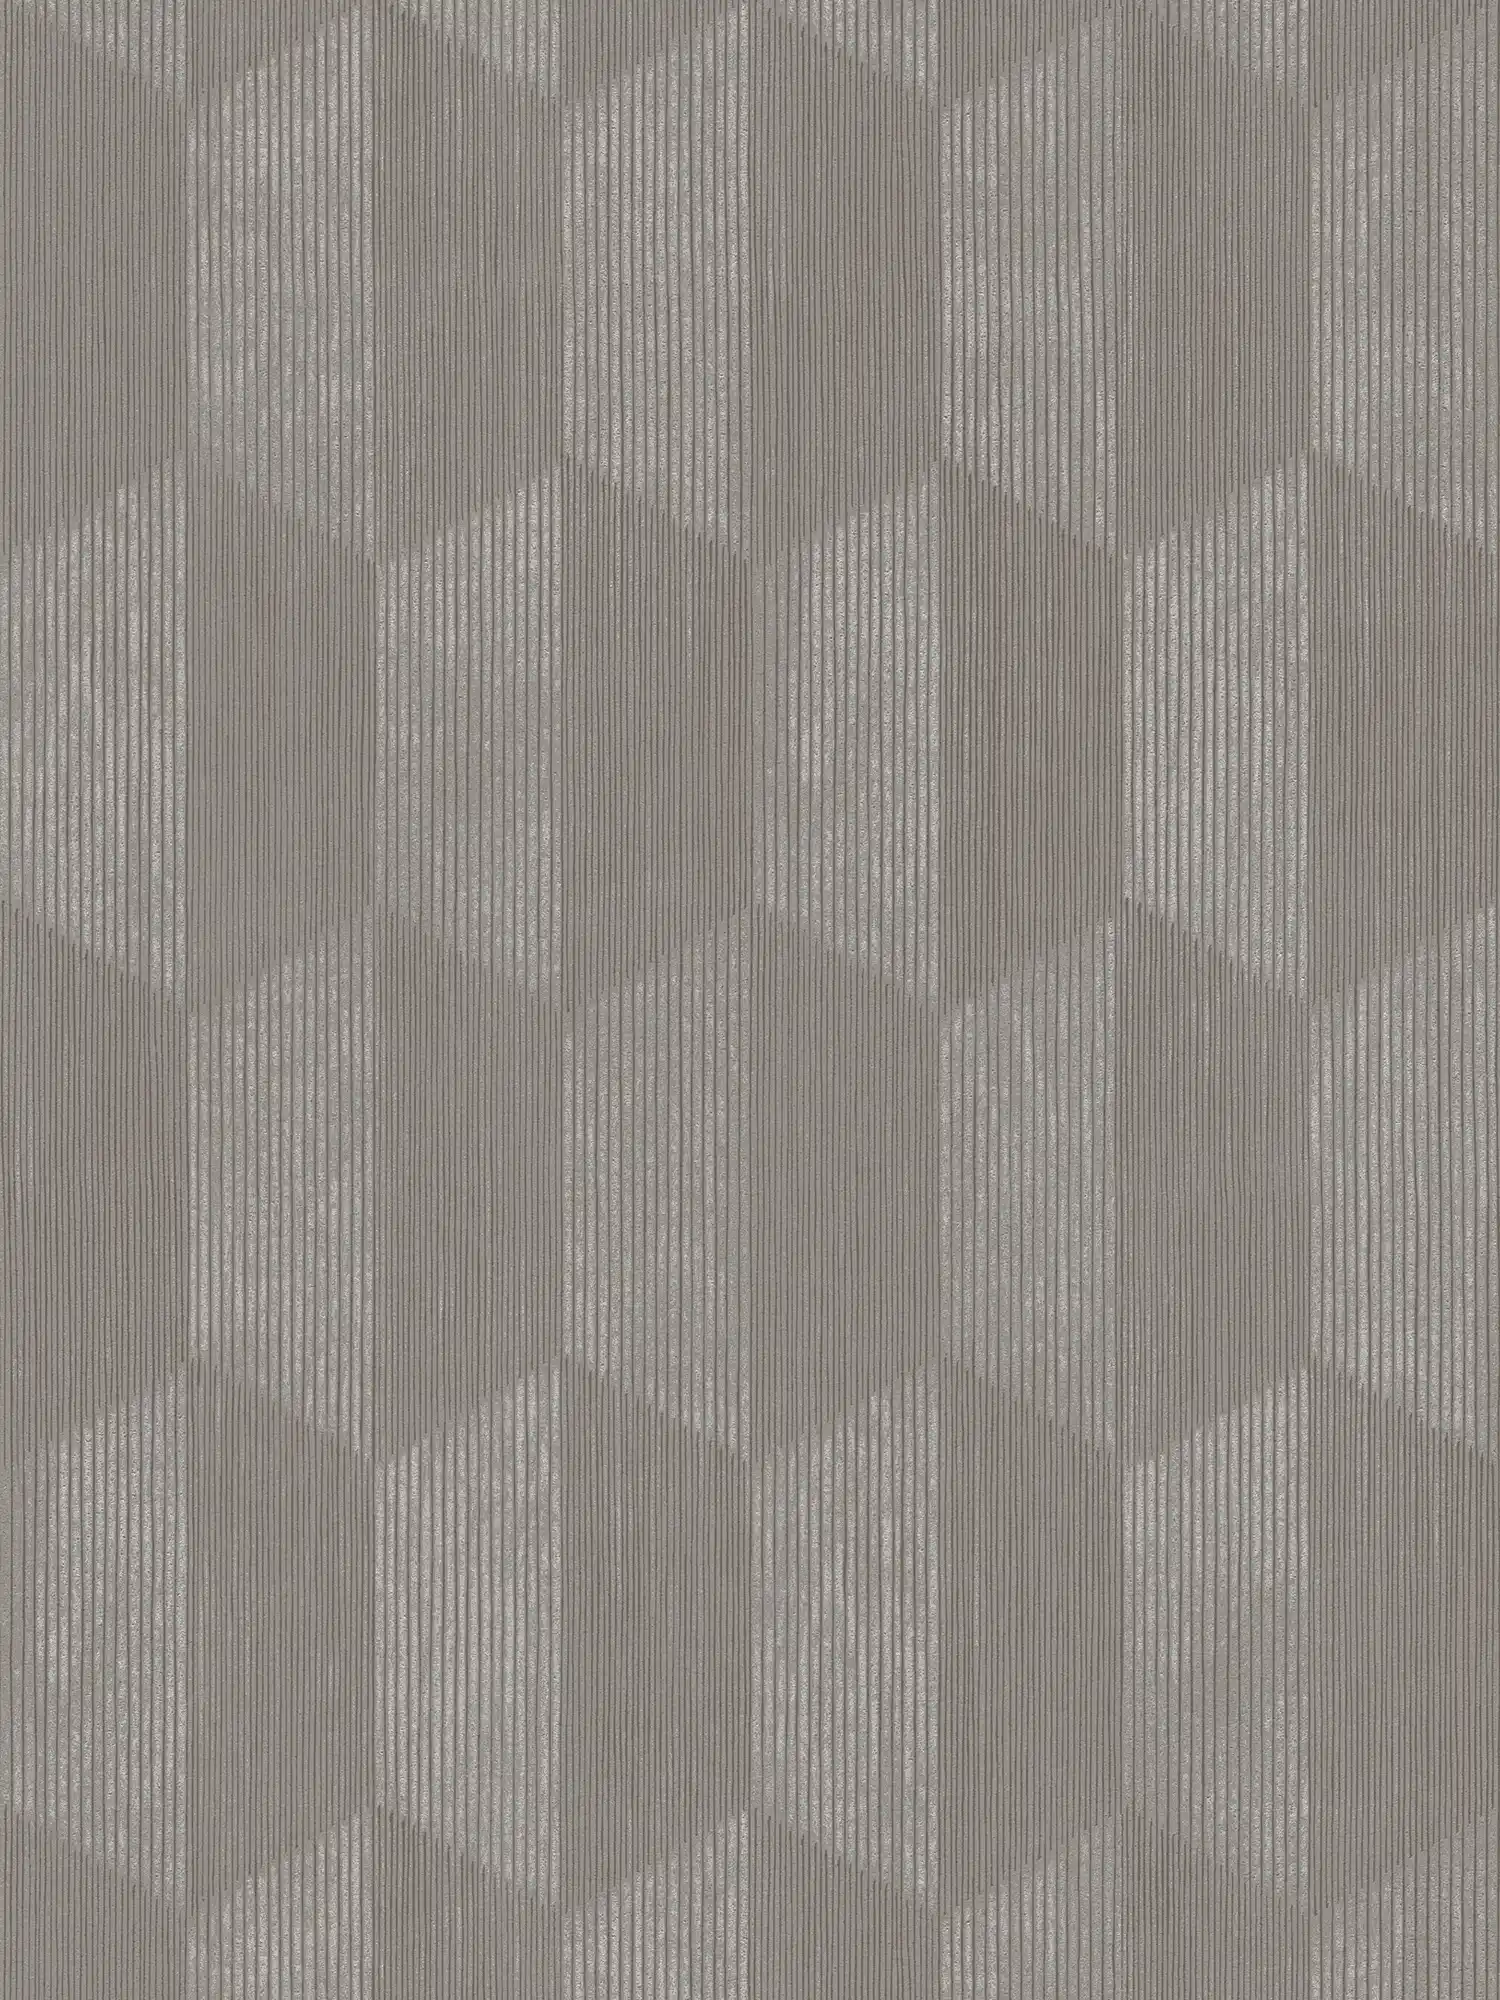 Textured wallpaper with 3D graphic pattern - grey, beige
